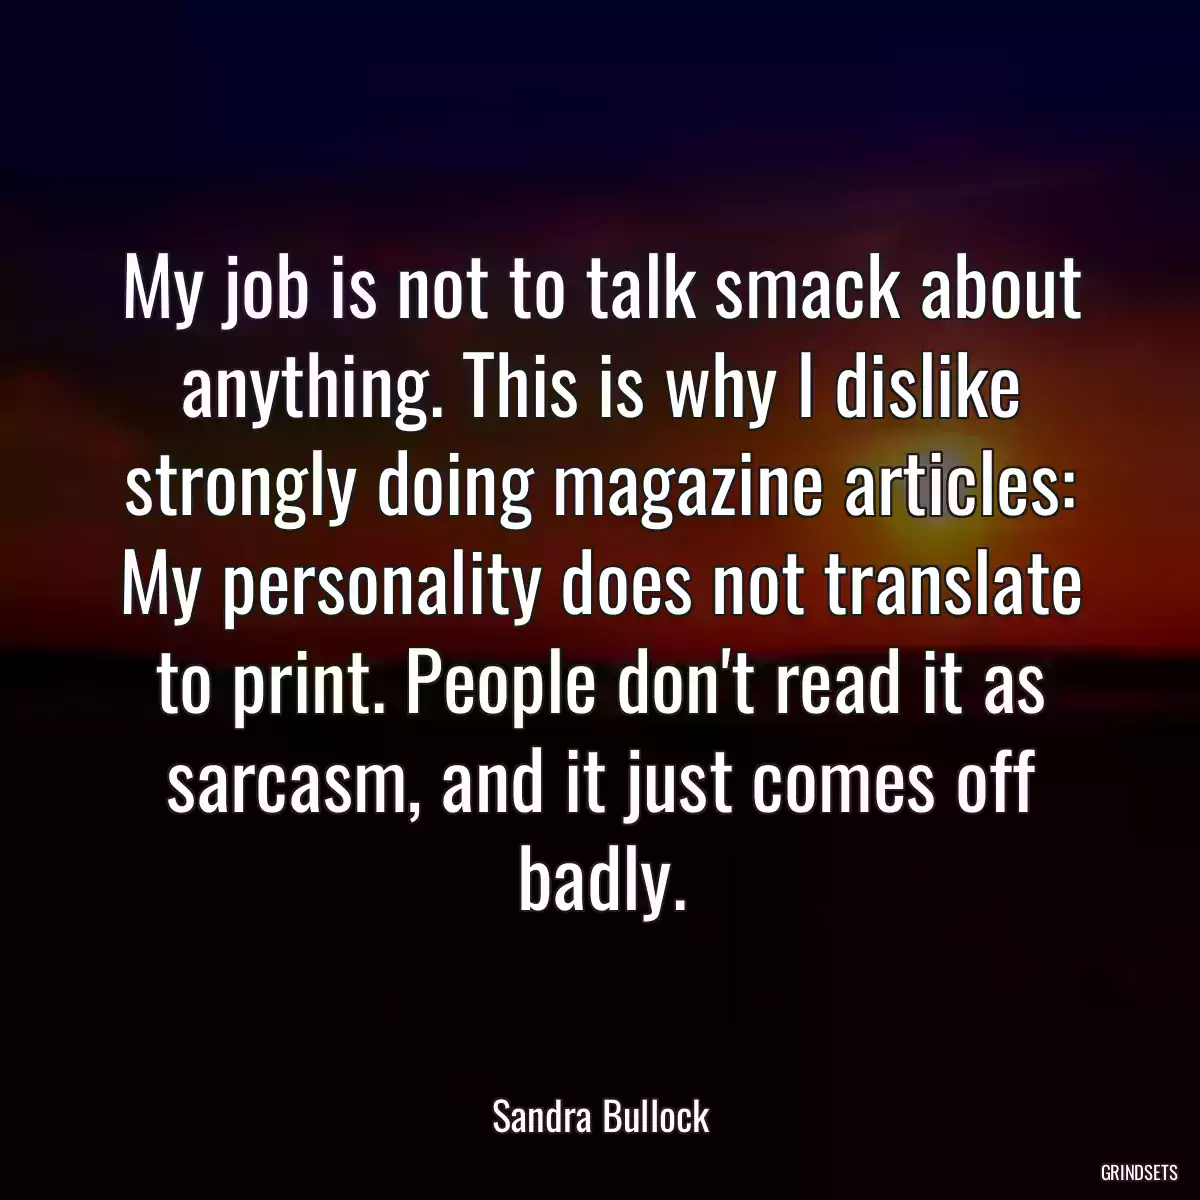 My job is not to talk smack about anything. This is why I dislike strongly doing magazine articles: My personality does not translate to print. People don\'t read it as sarcasm, and it just comes off badly.